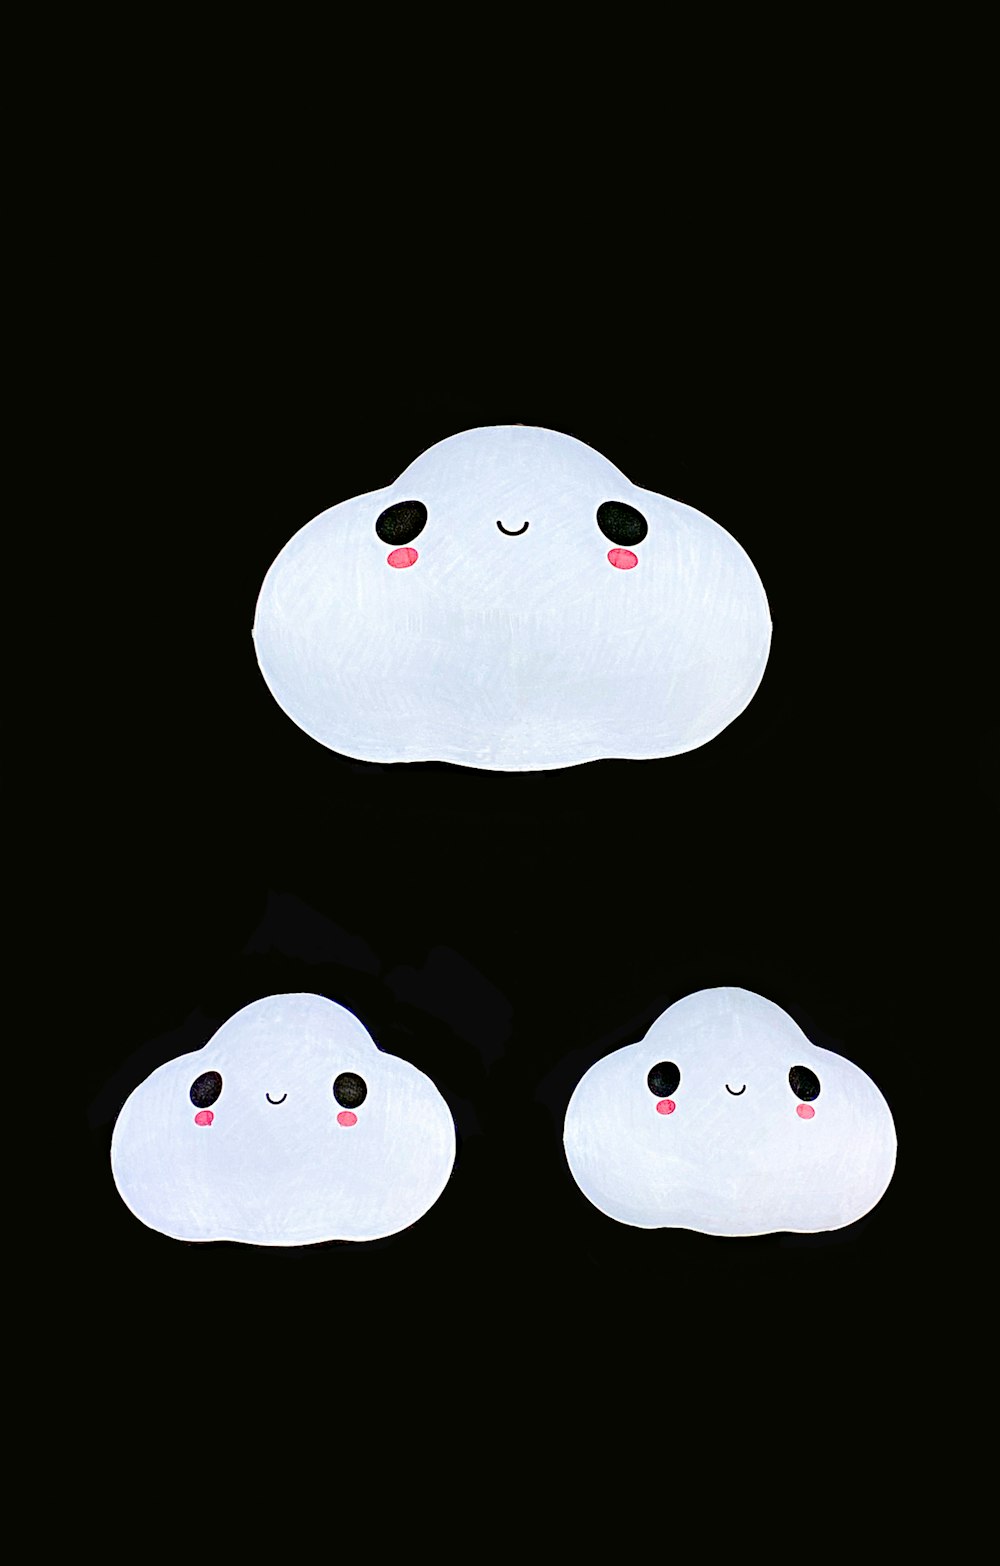 three white clouds with faces drawn on them